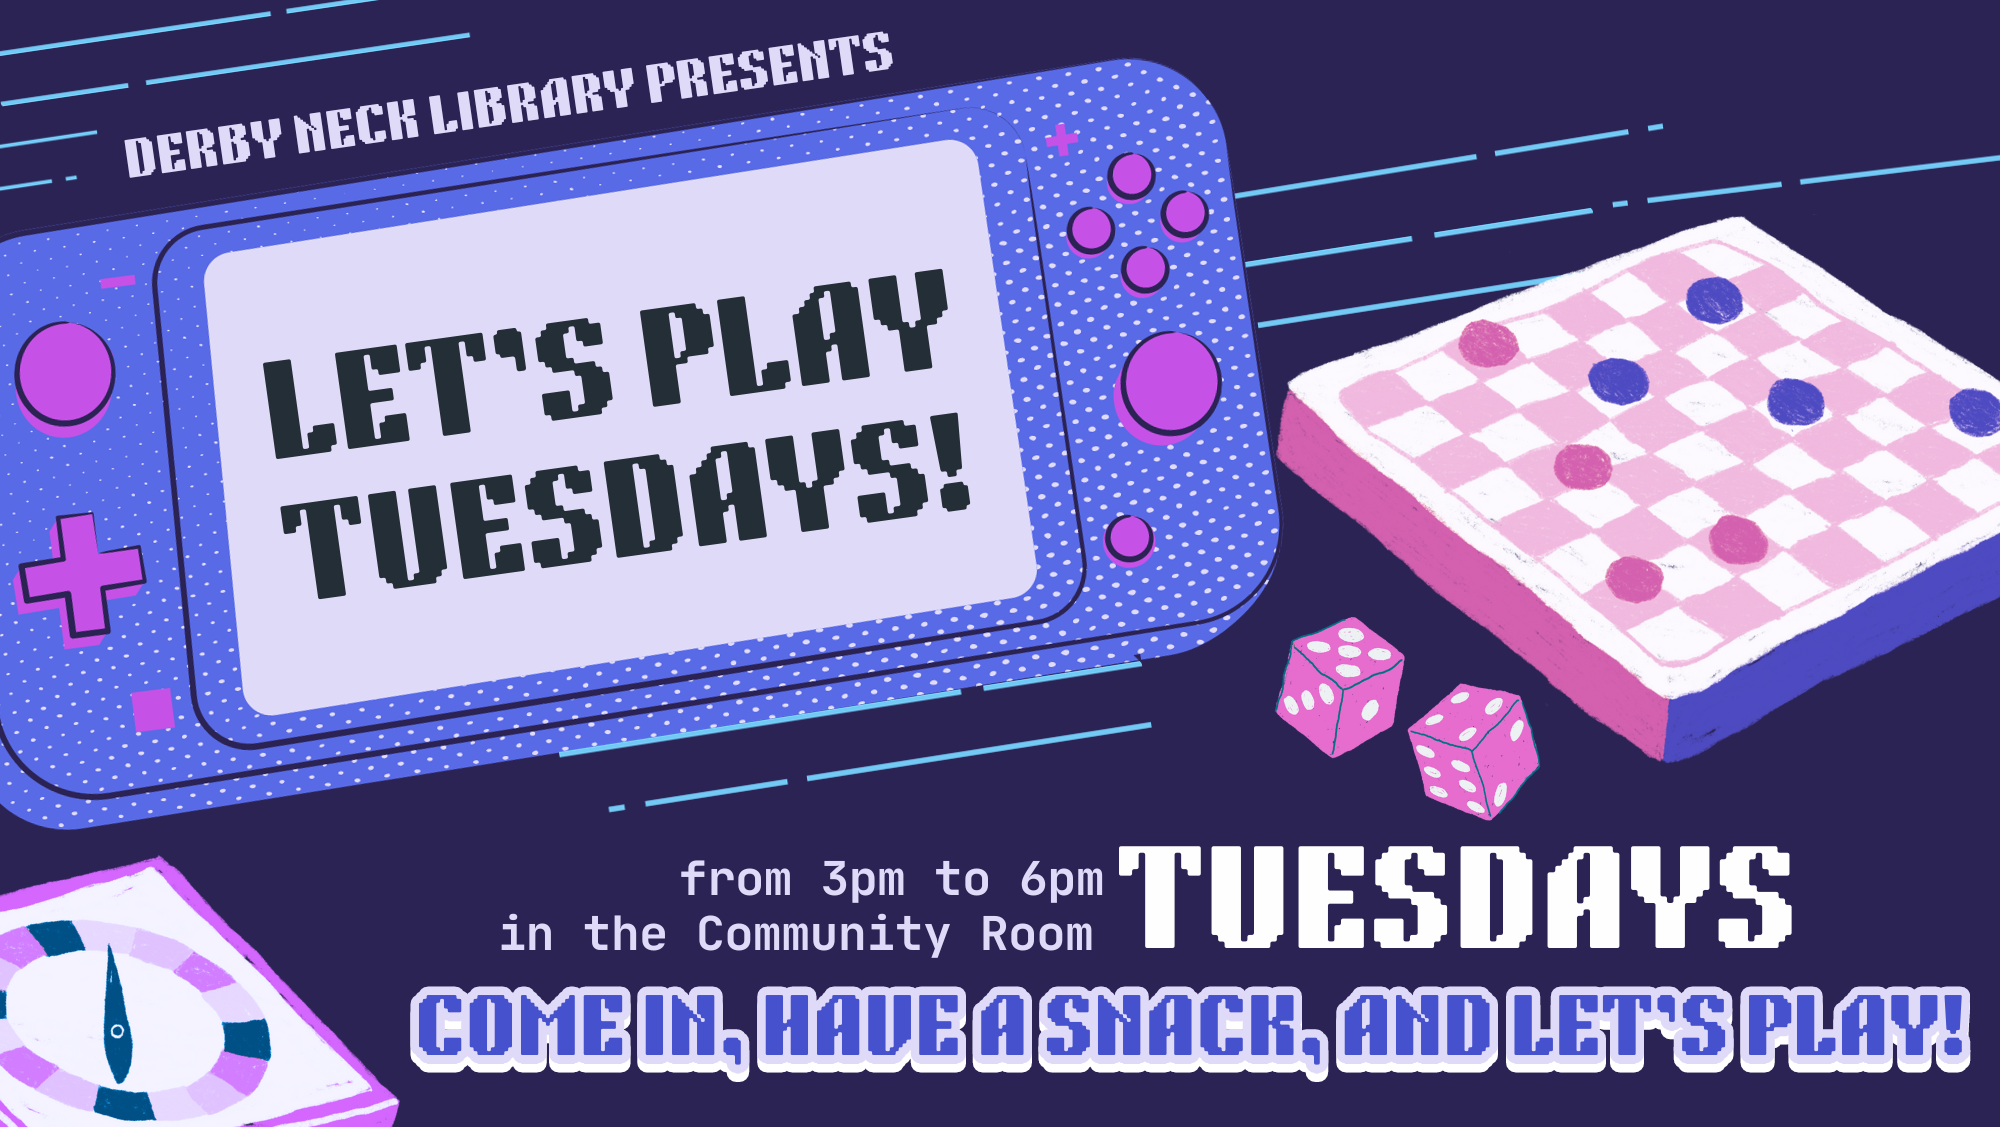 CANCELLED - Let's Play Tuesdays!